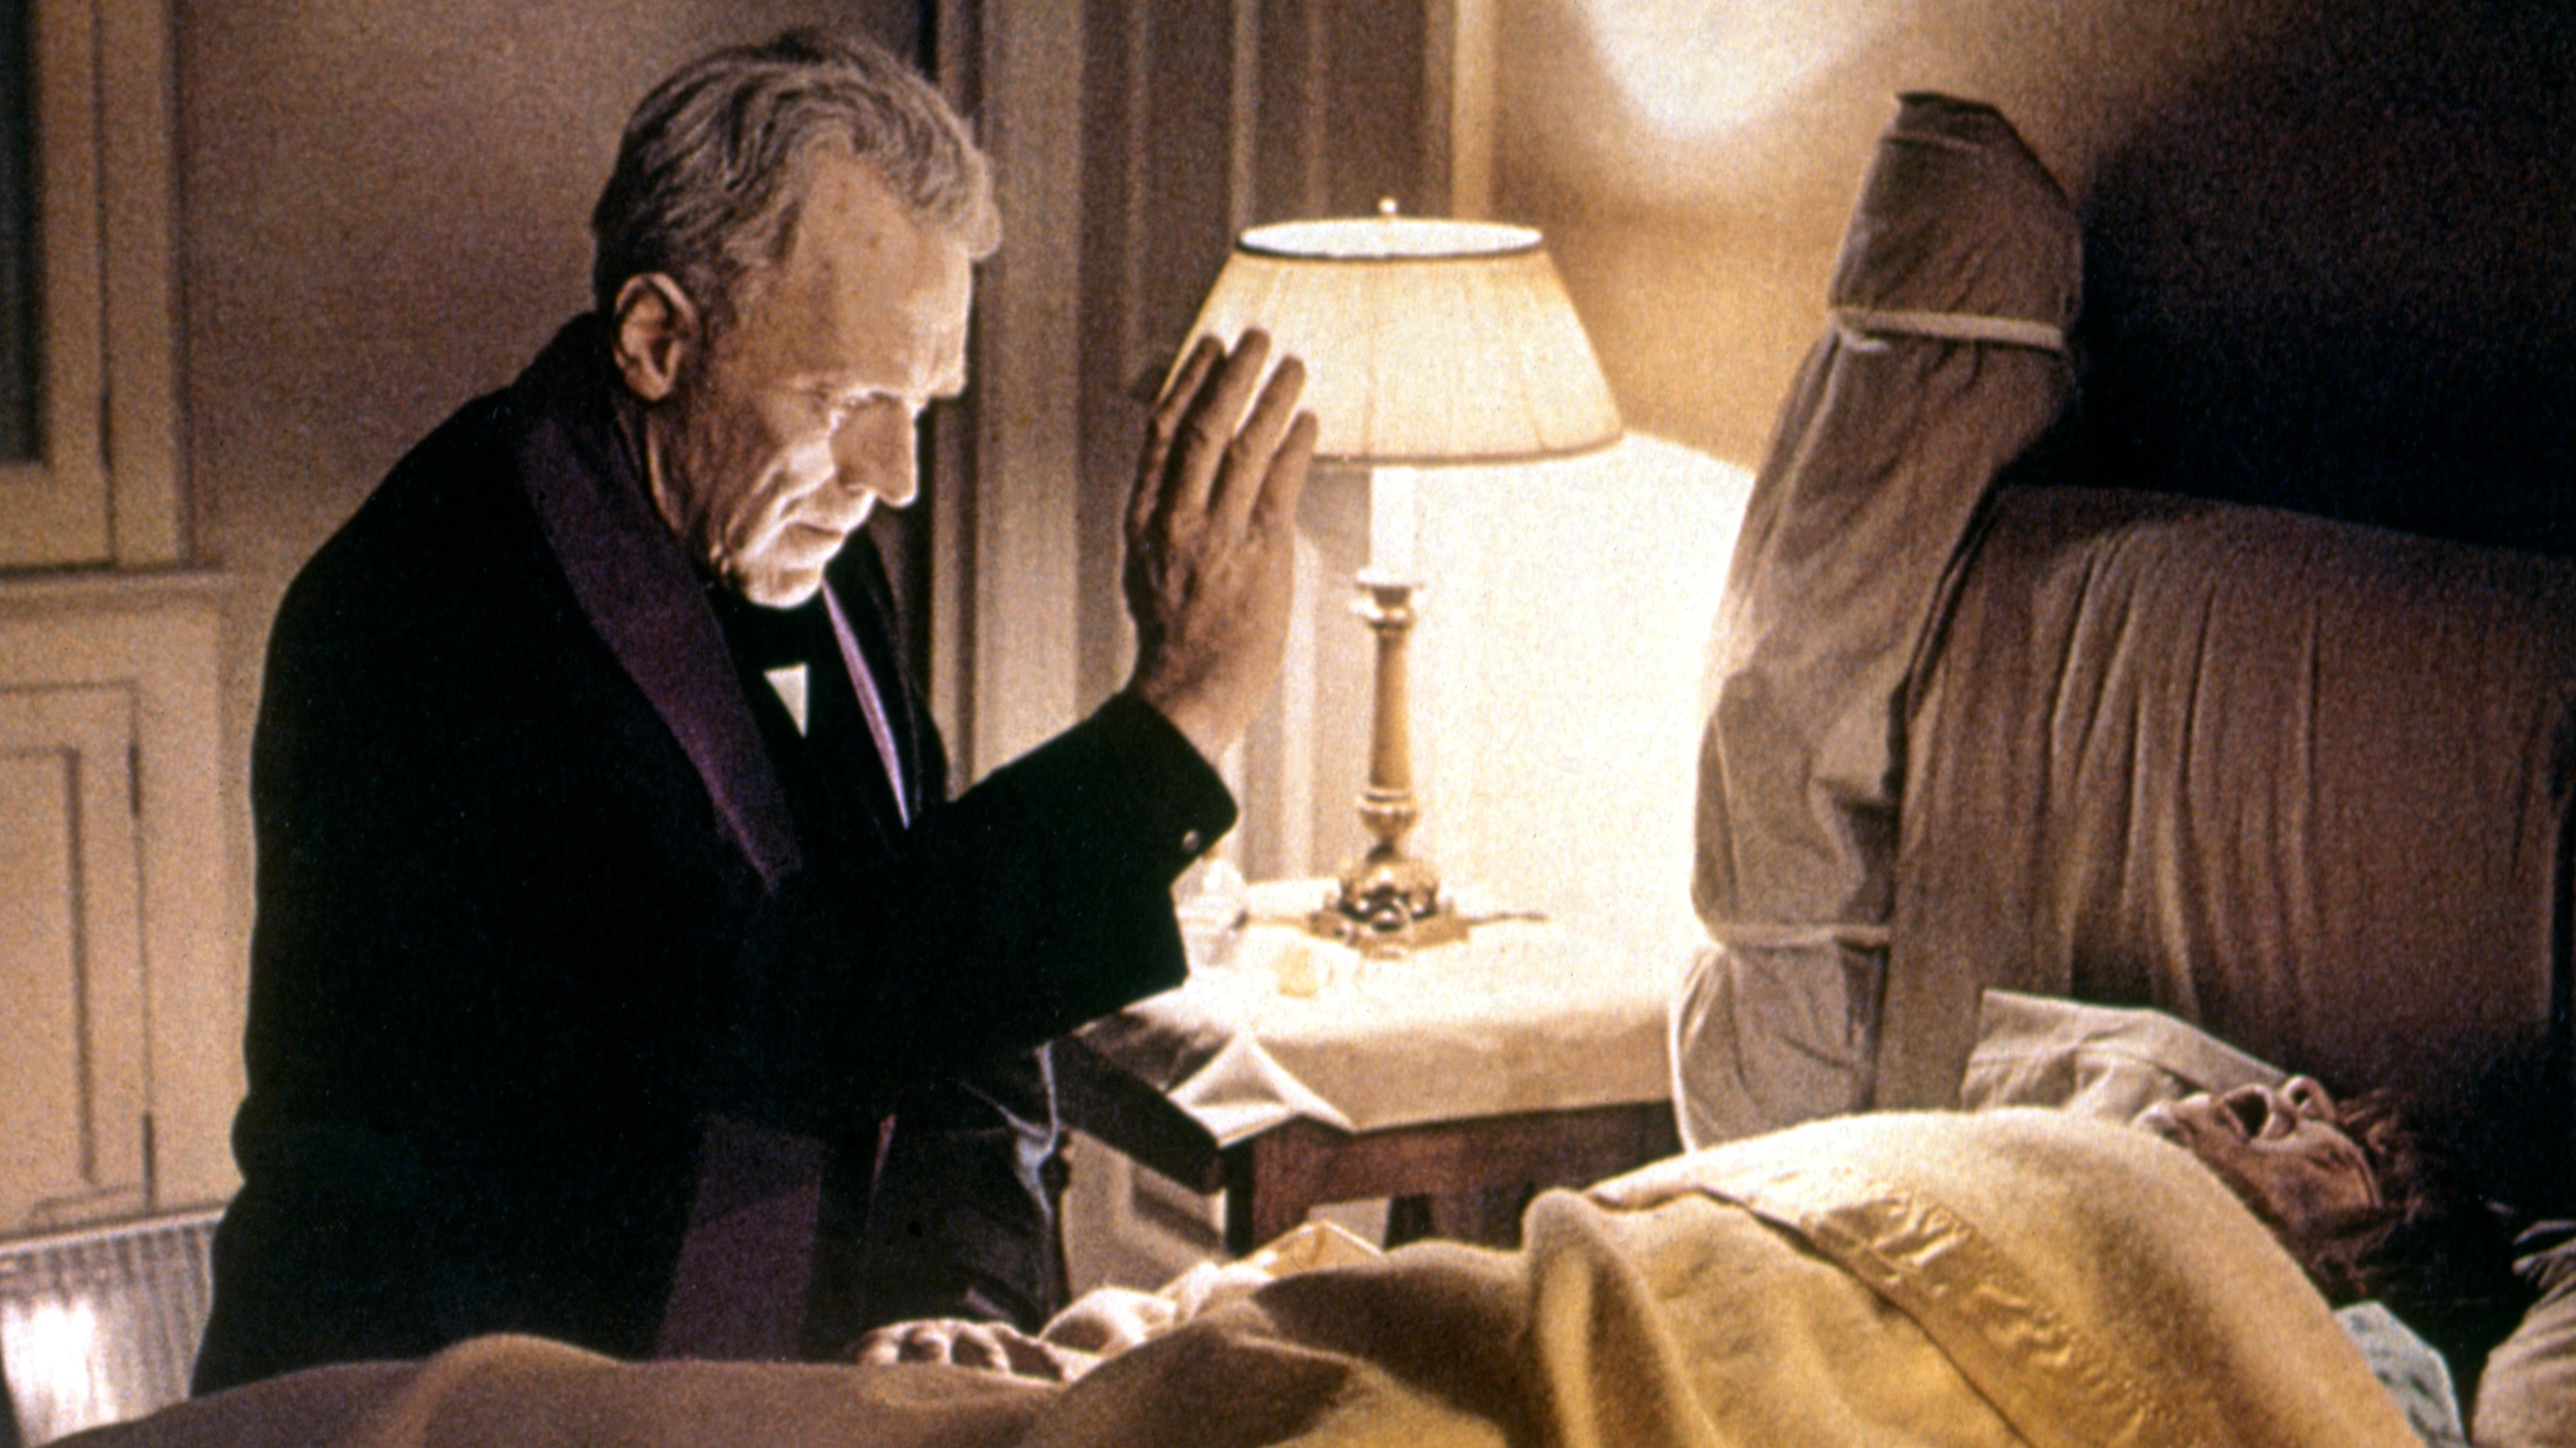 Film Trivia Fact Check: The Exorcist‘s cursed injury report